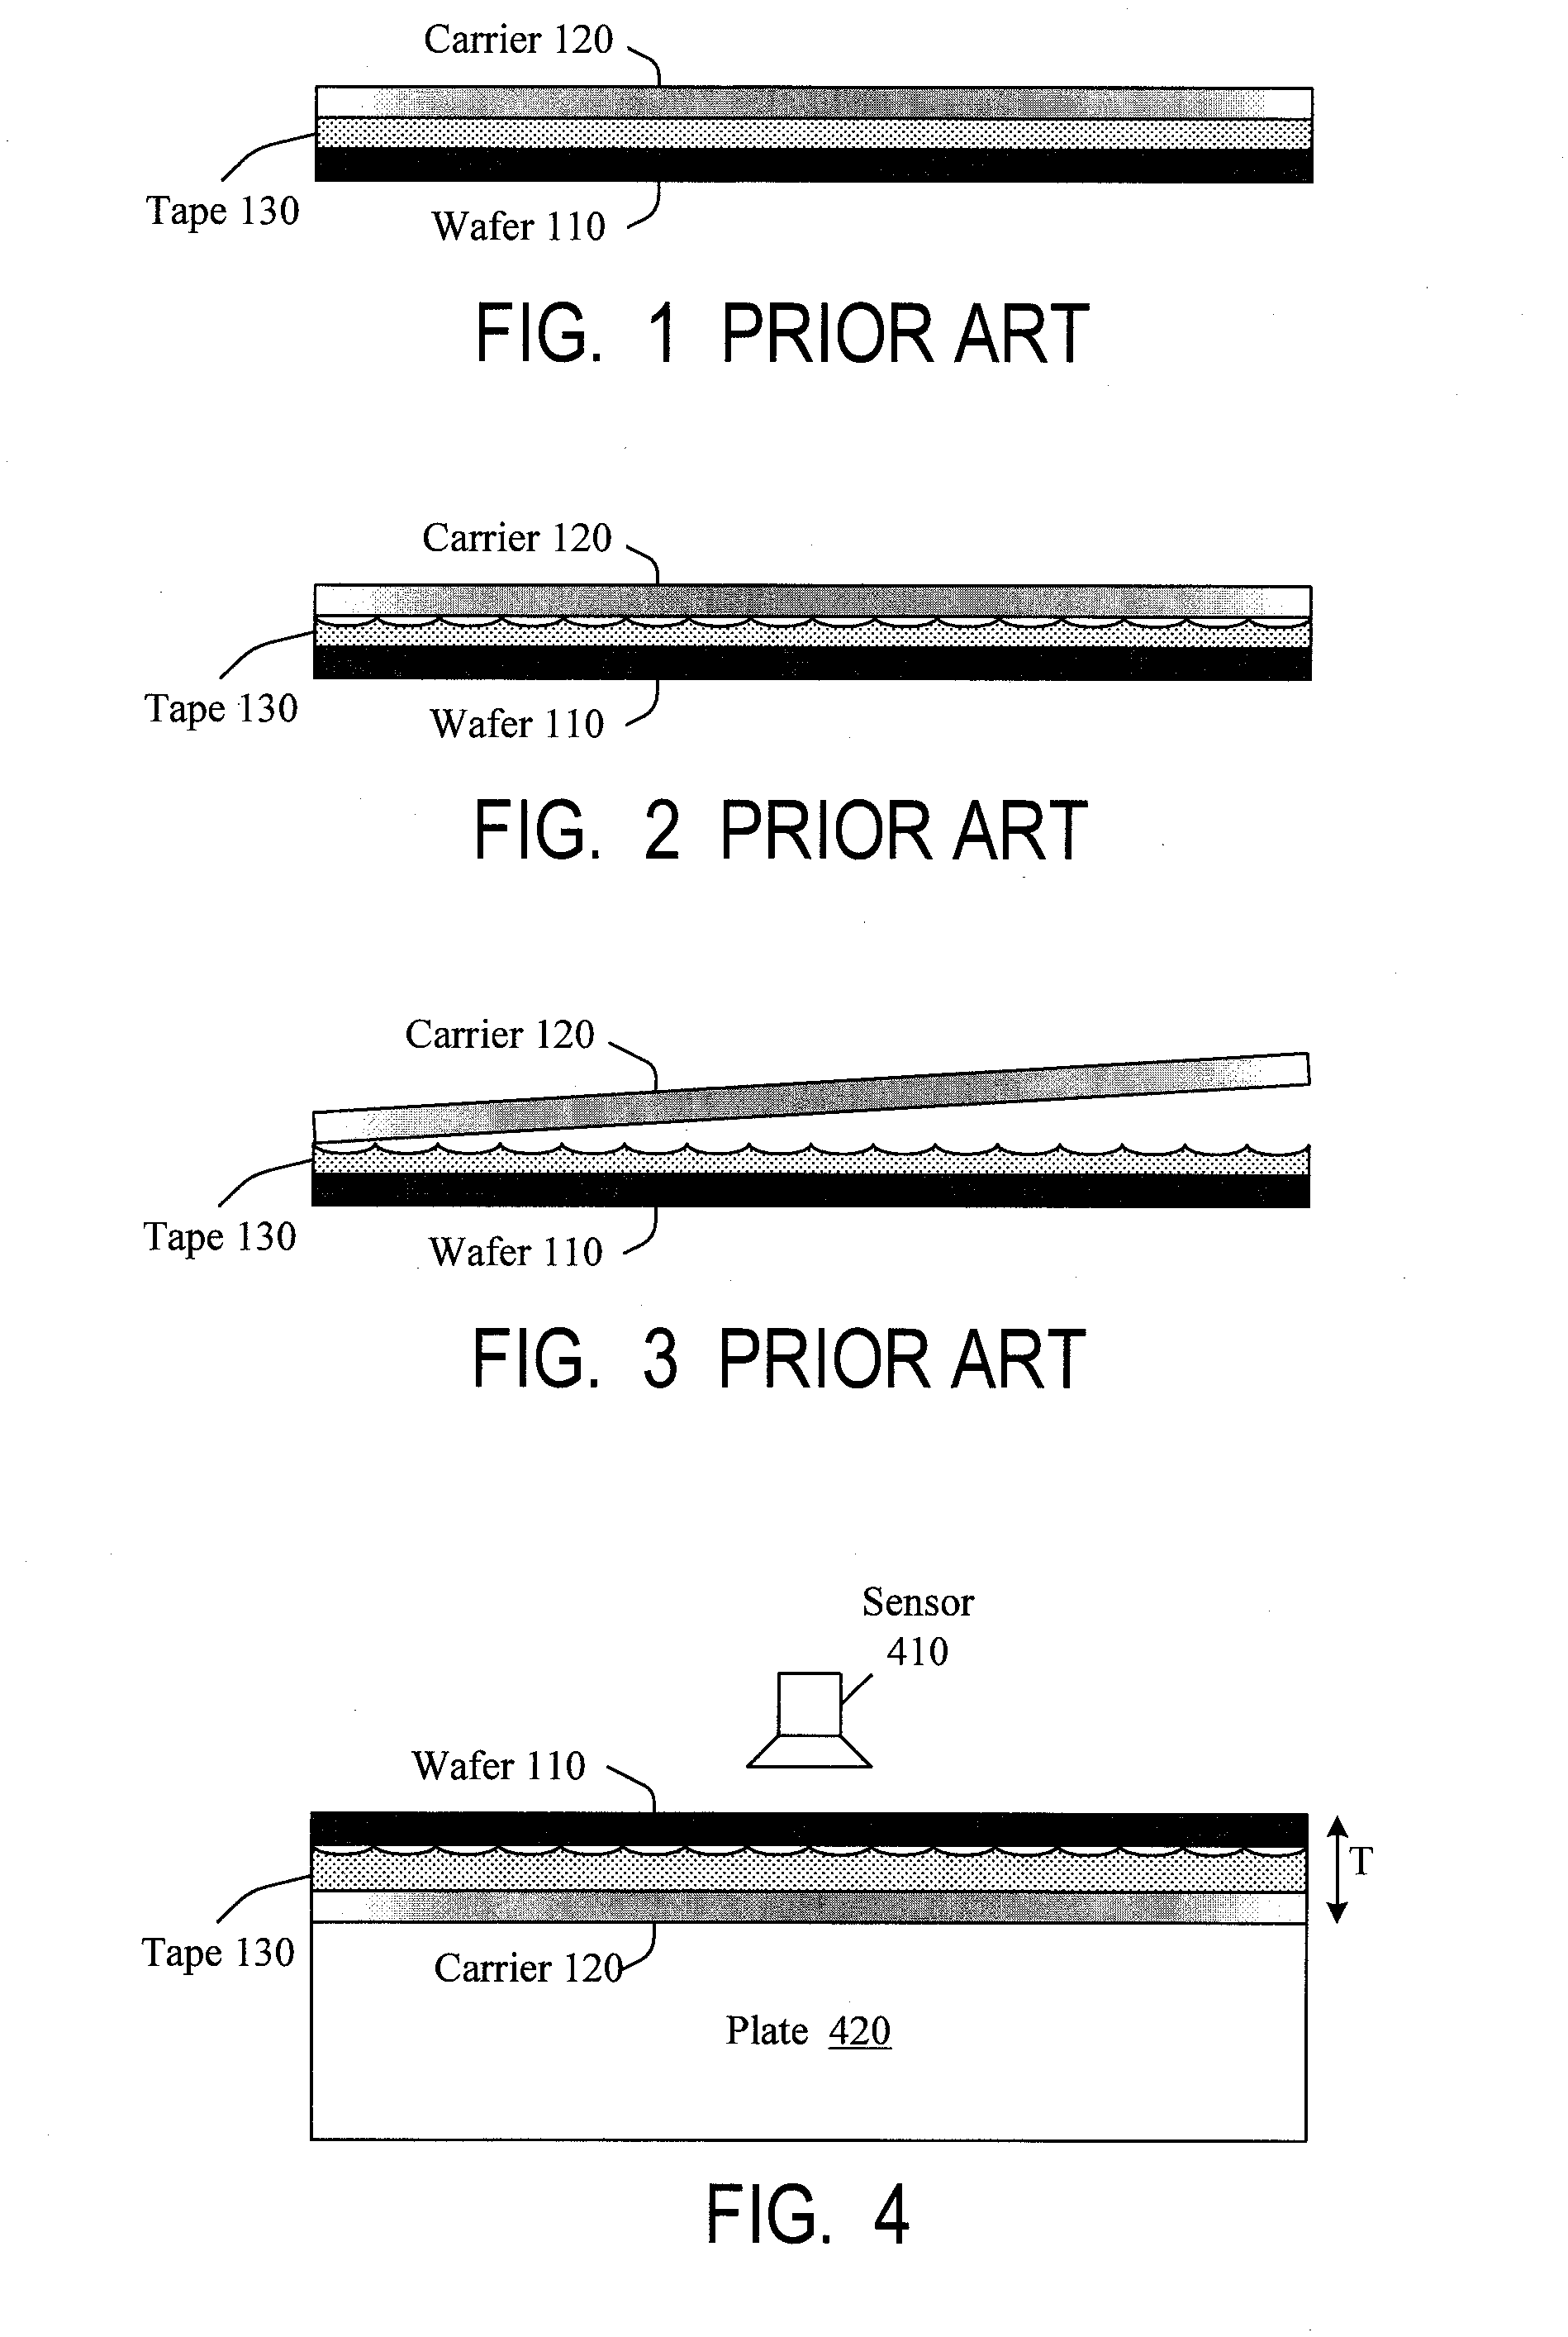 Method and apparatus for debonding of structures which are bonded together, including (but not limited to) debonding of semiconductor wafers from carriers when the bonding is effected by double-sided adhesive tape